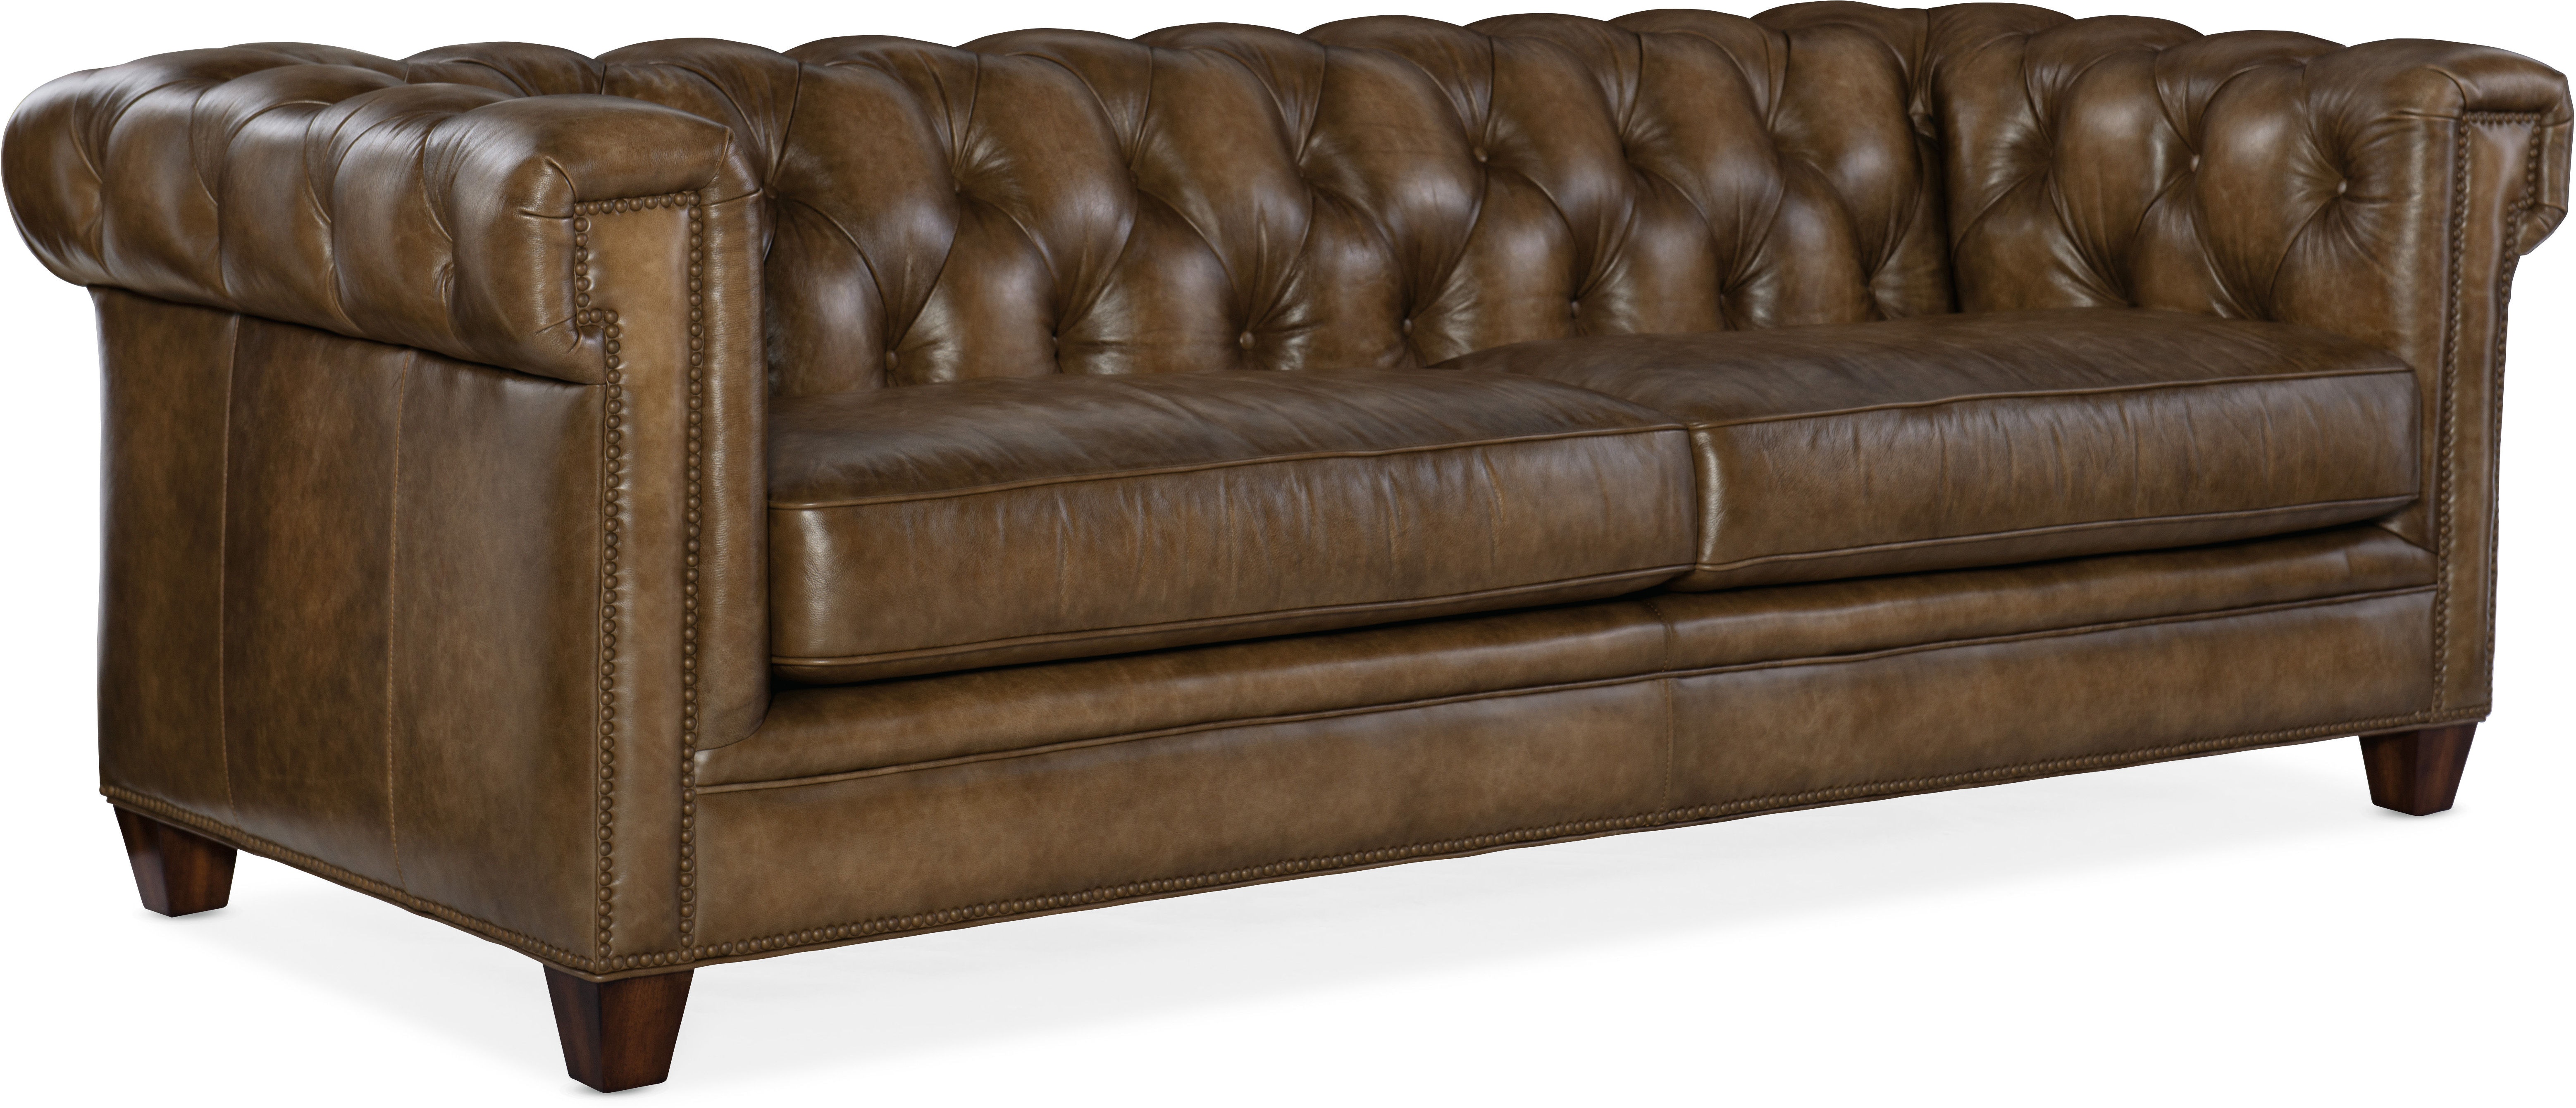 chester tufted leather sofa review